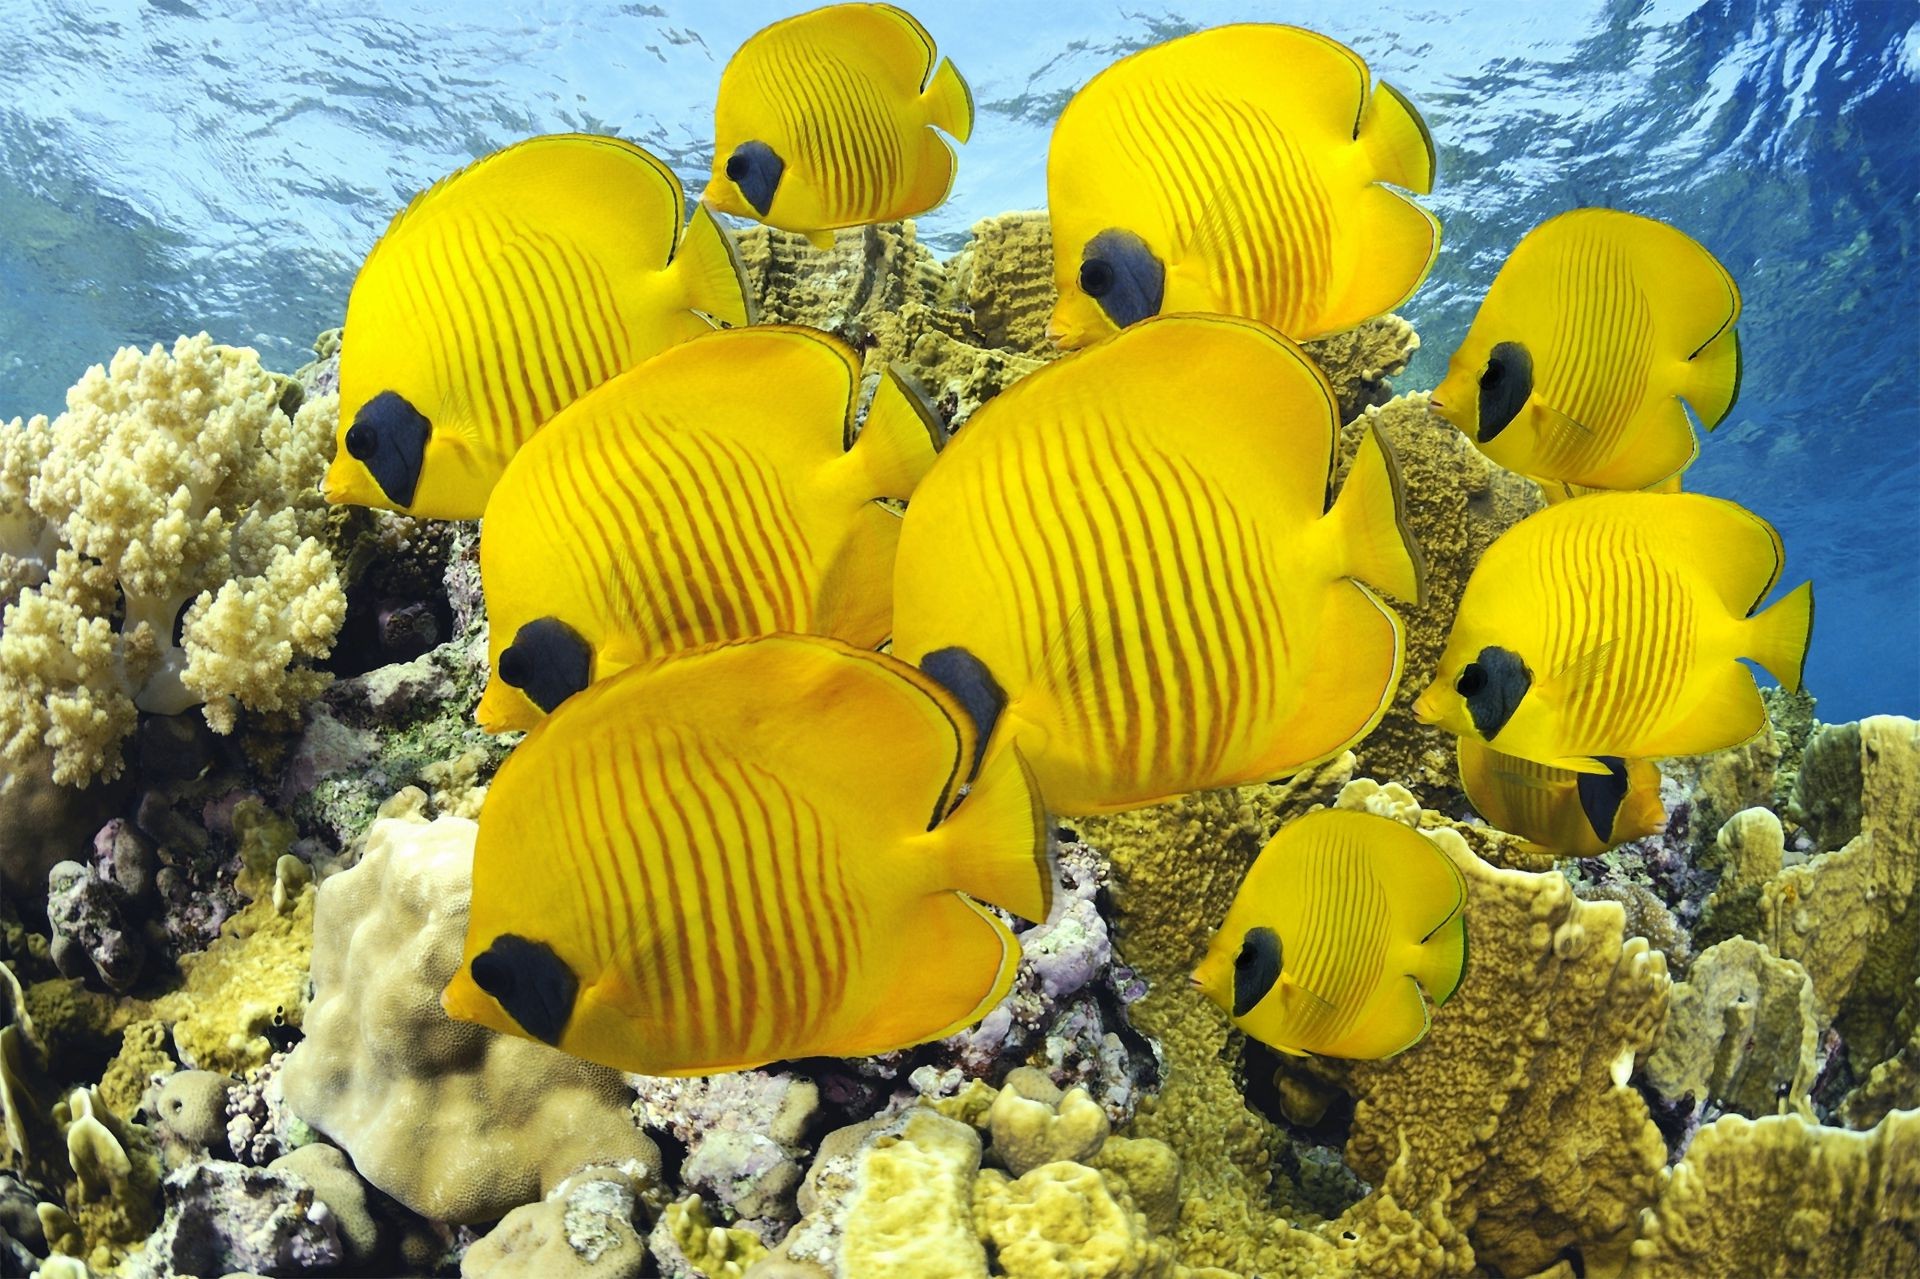 animals underwater ocean water sea tropical nature fish coral travel fair weather color reef summer